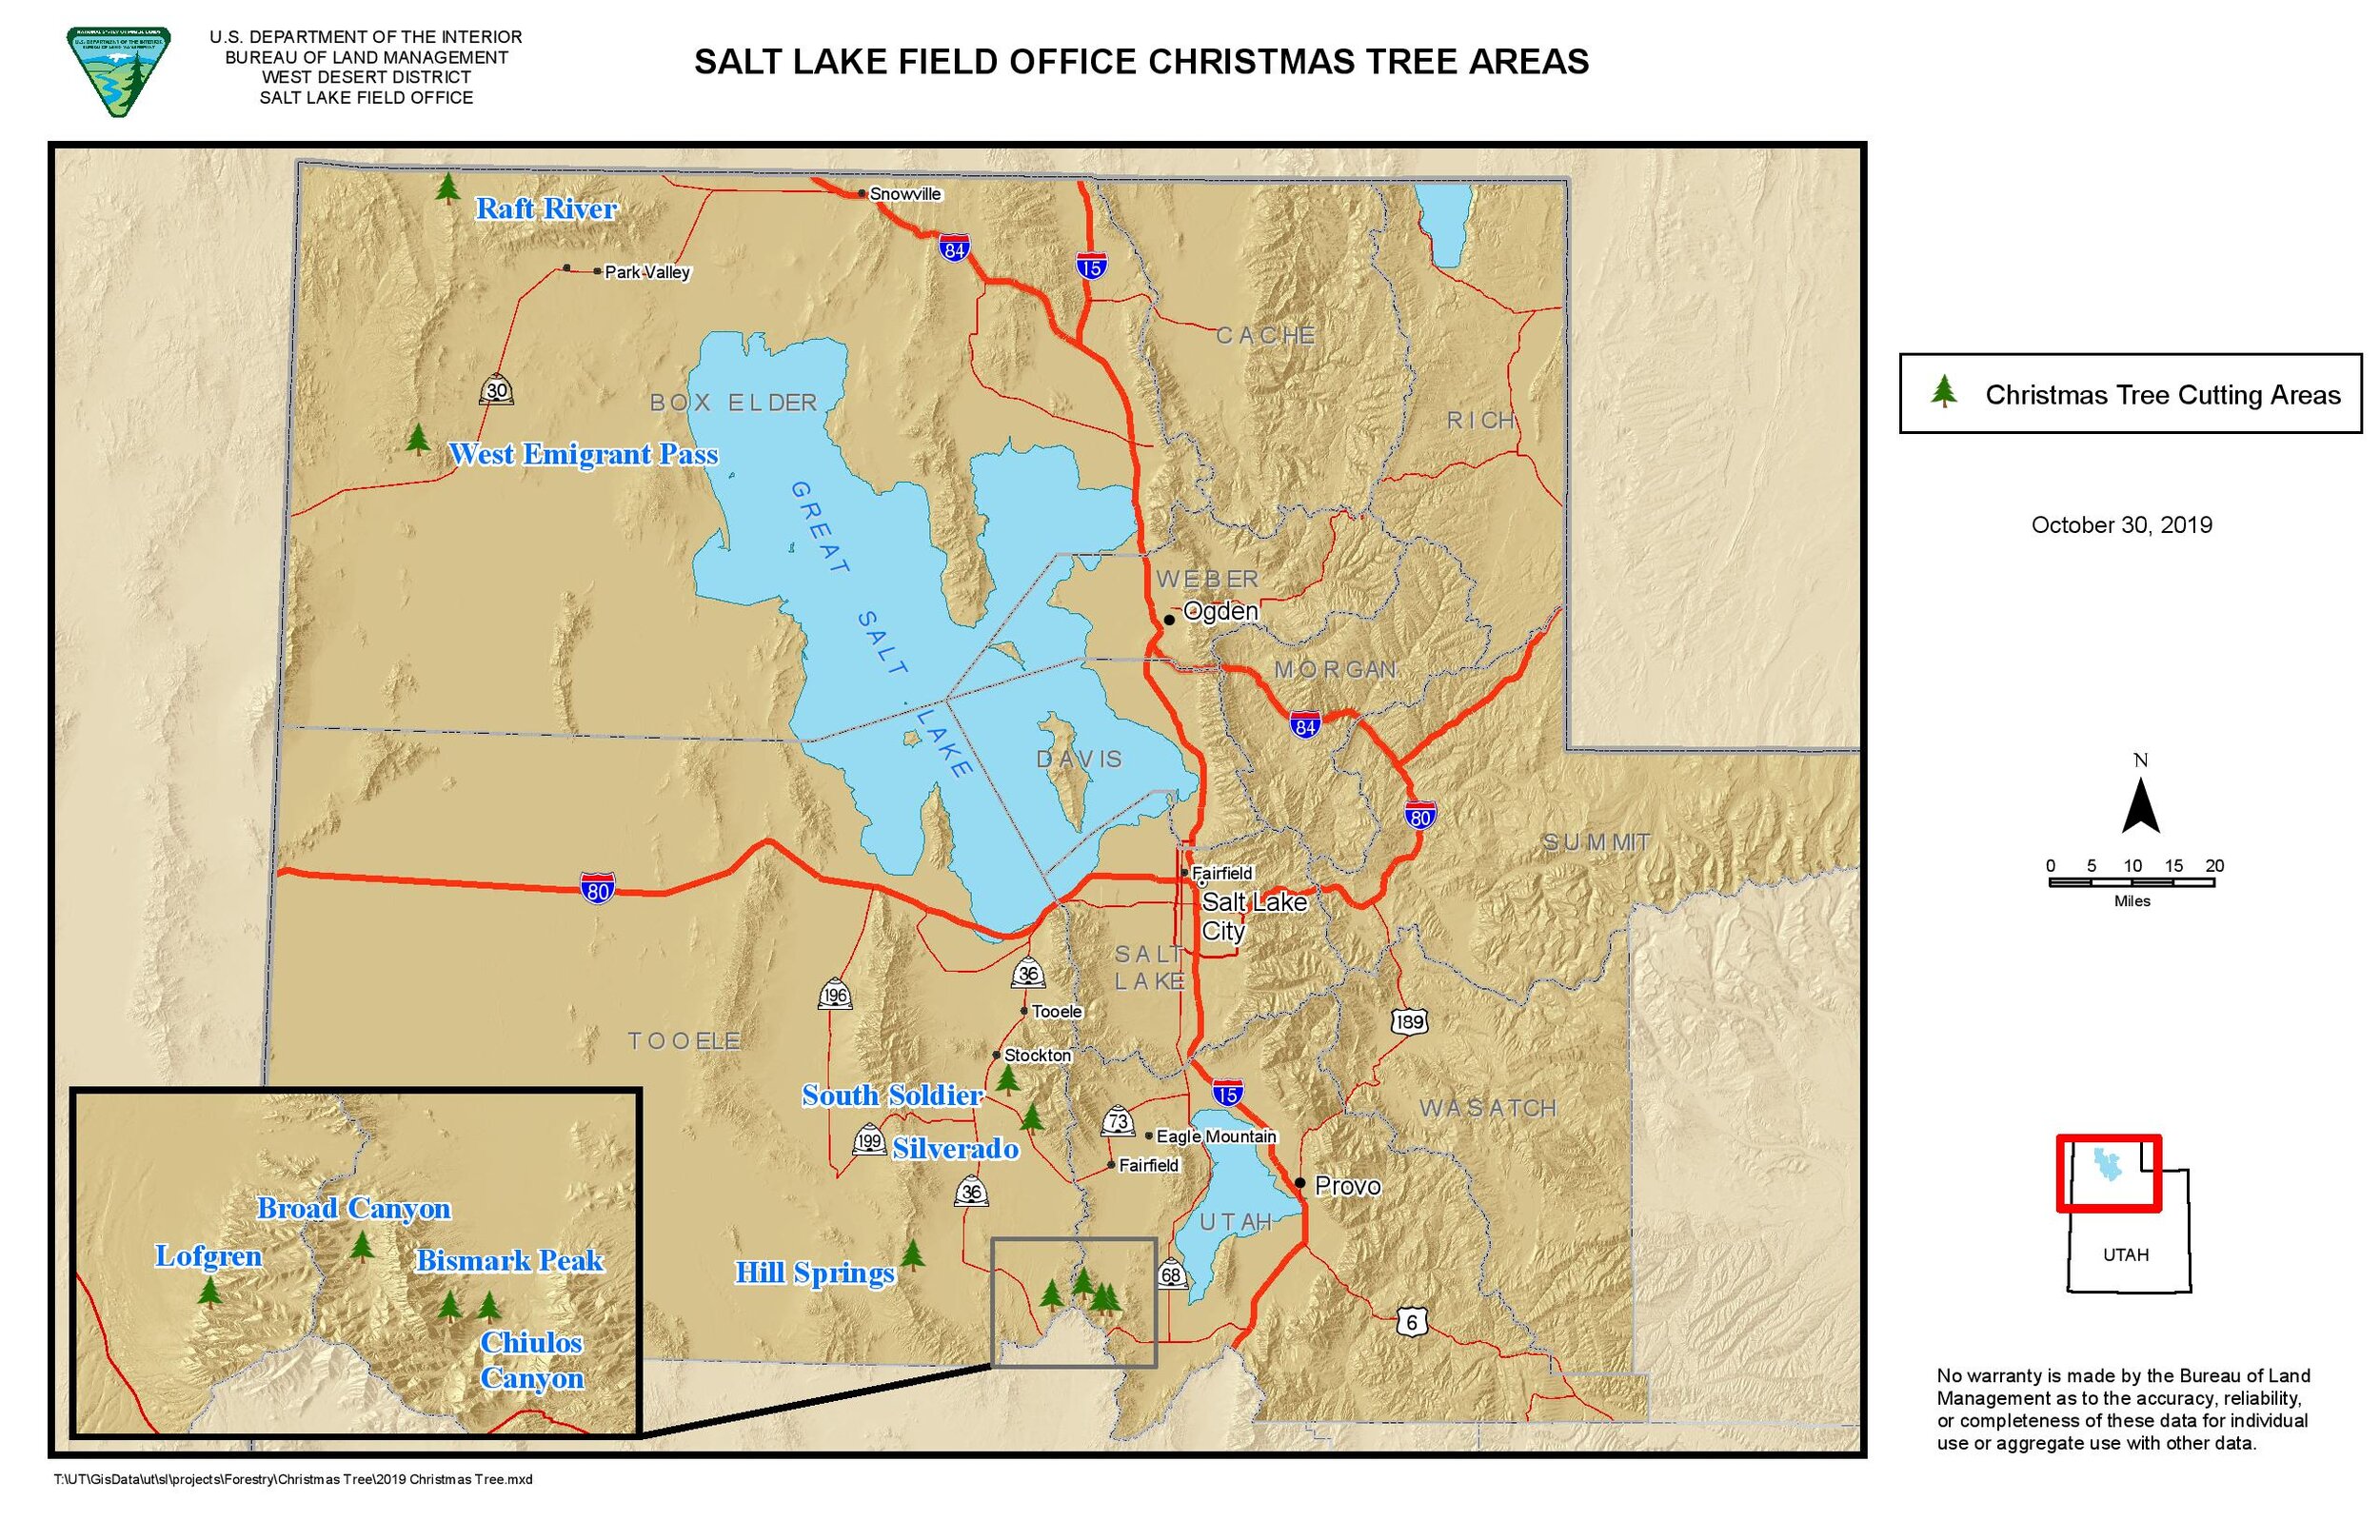 A map of Christmas tree cutting locations around Salt Lake City